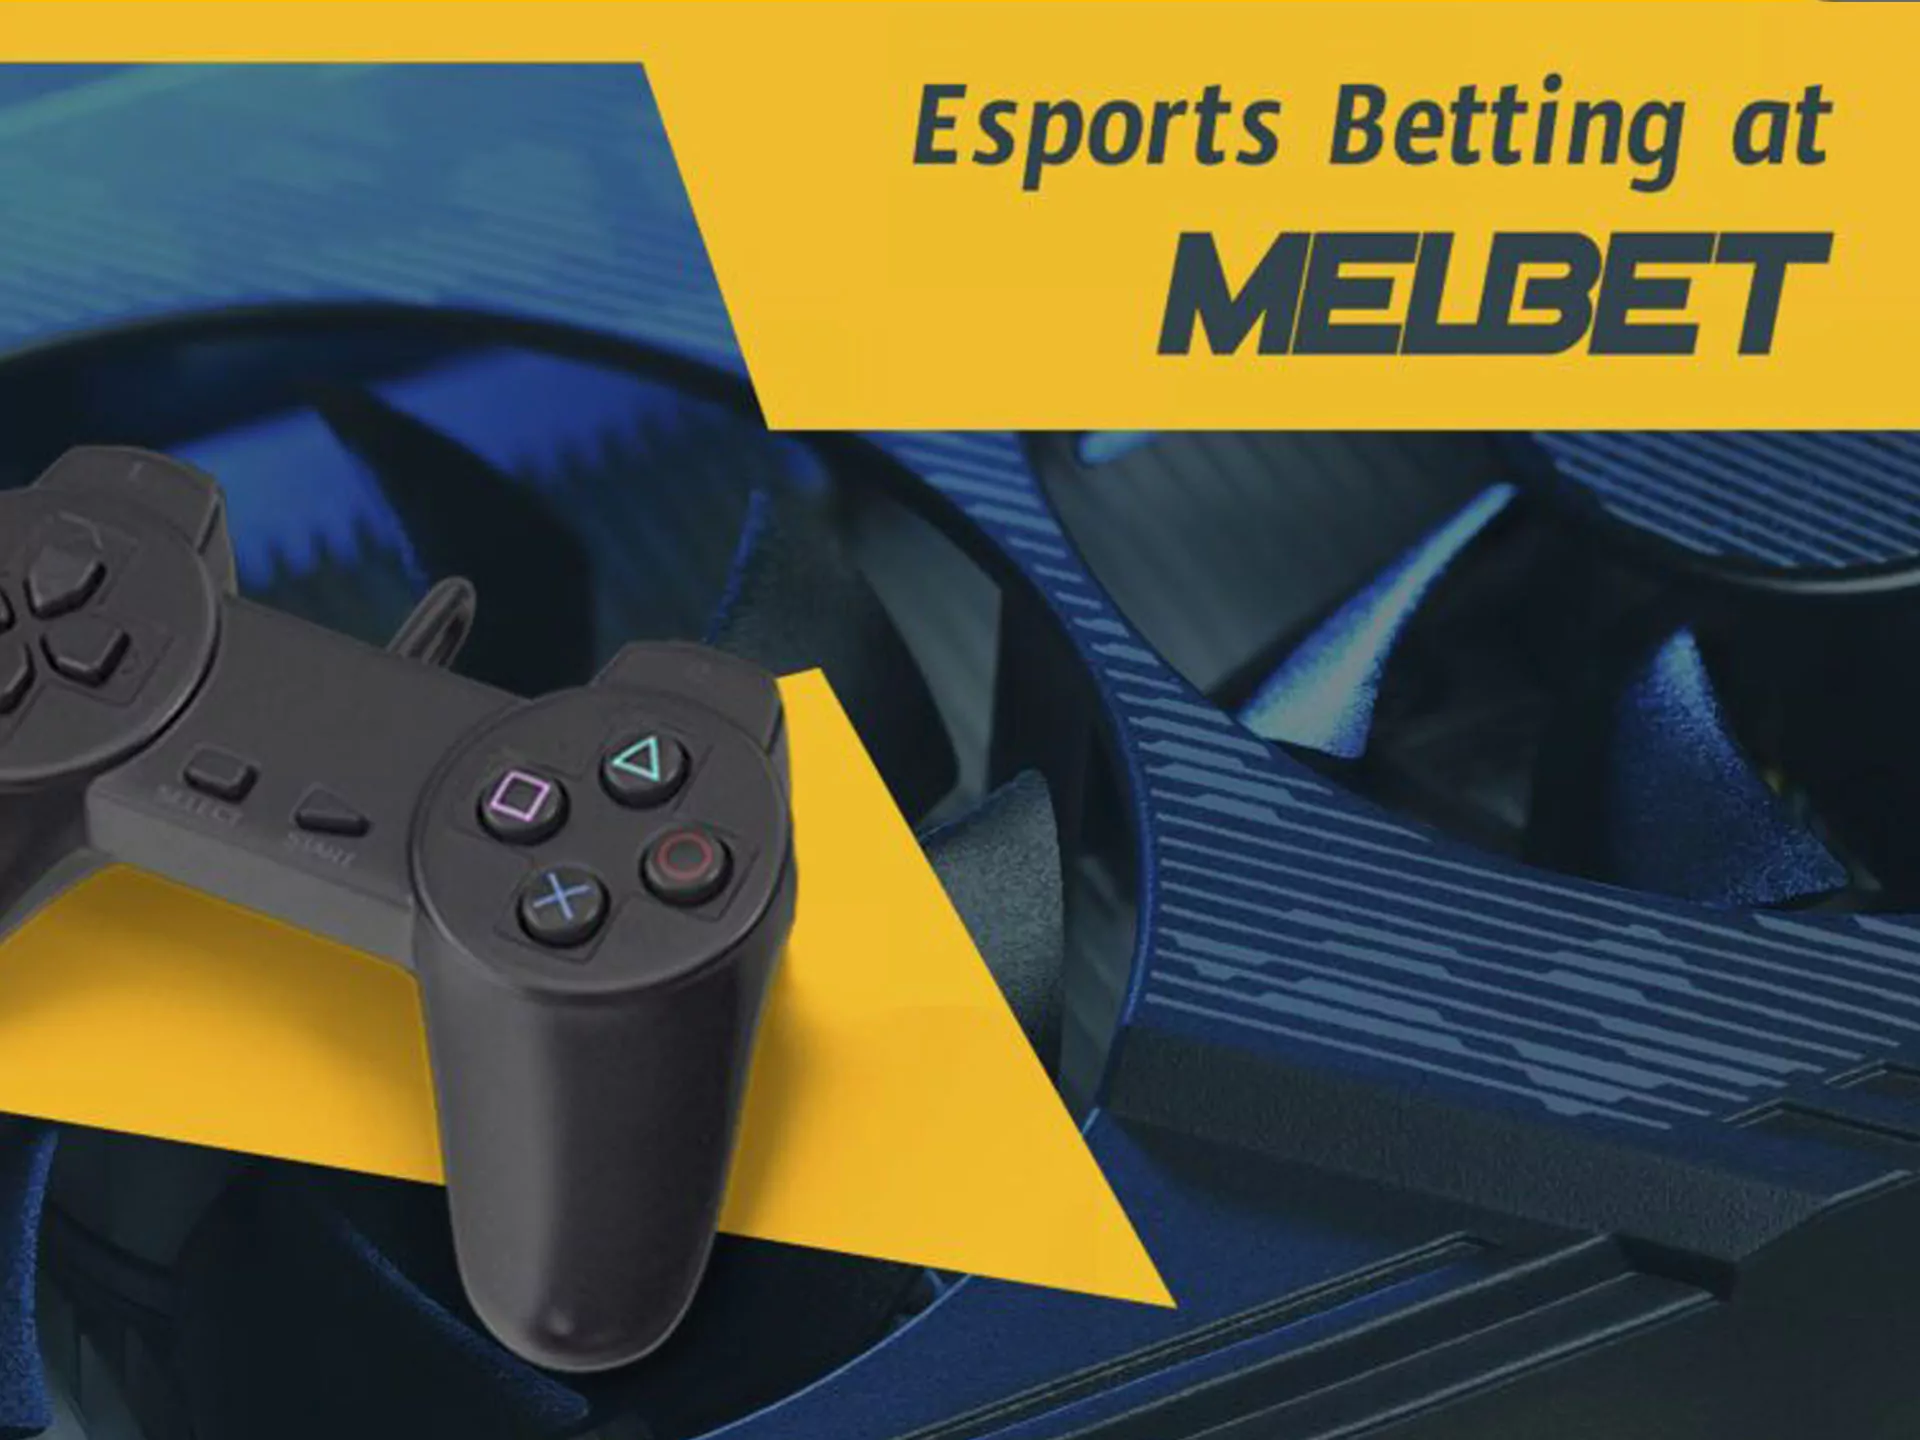 Bet on e-sports in Bangladesh with melbet.